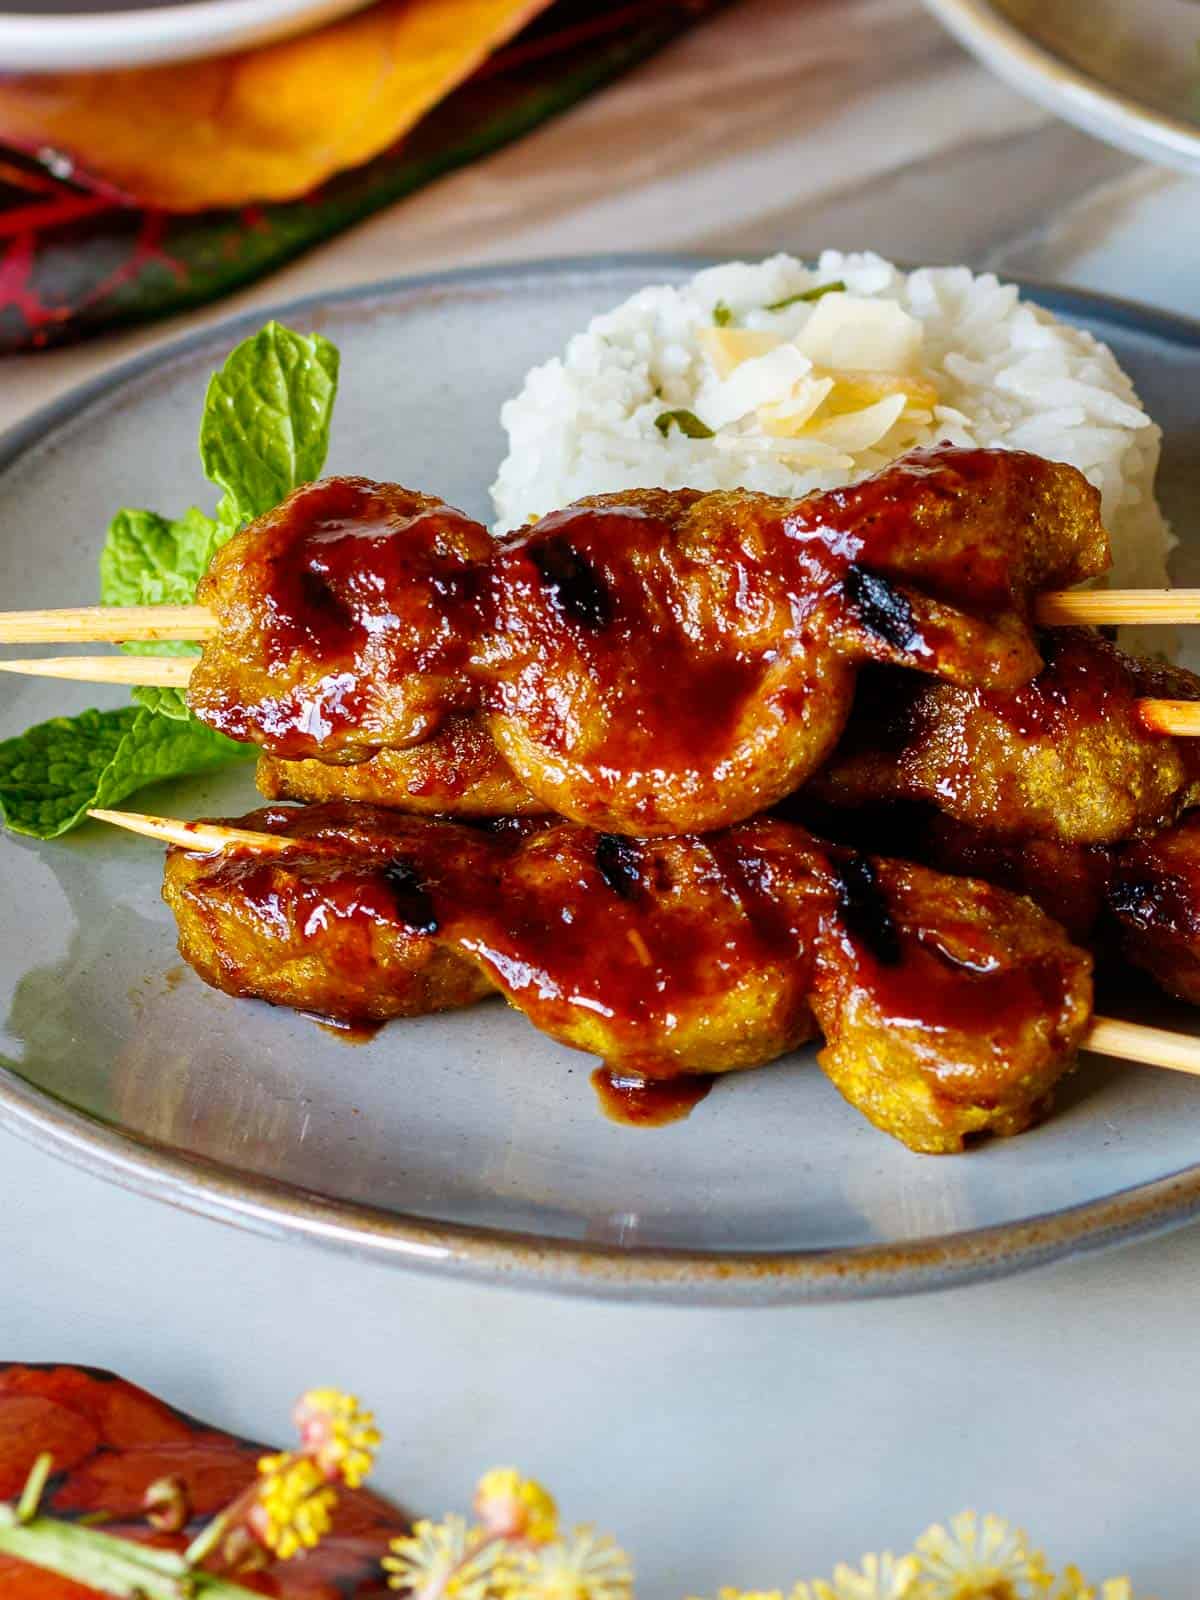 Juicy, chewy seitan skewers dripping with Hawaiian barbecue sauce.